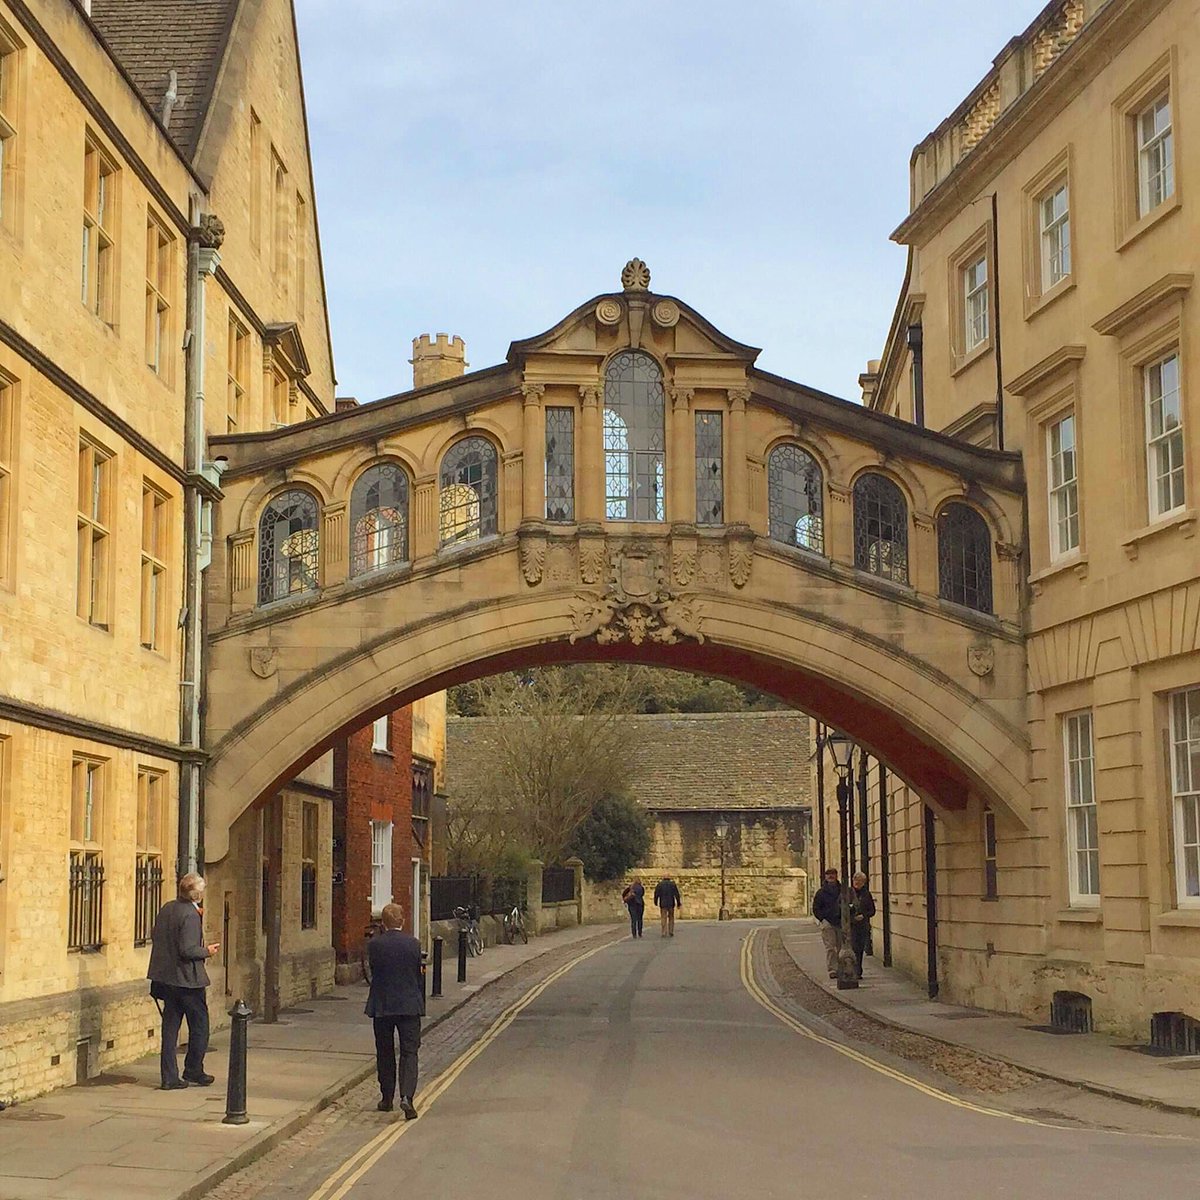 #HertfordBridge, often called the Bridge of Sighs, is a skyway joining two parts of Hertford College over New College Lane in Oxford. It was designed by Sir Thomas Jackson and completed in 1914.